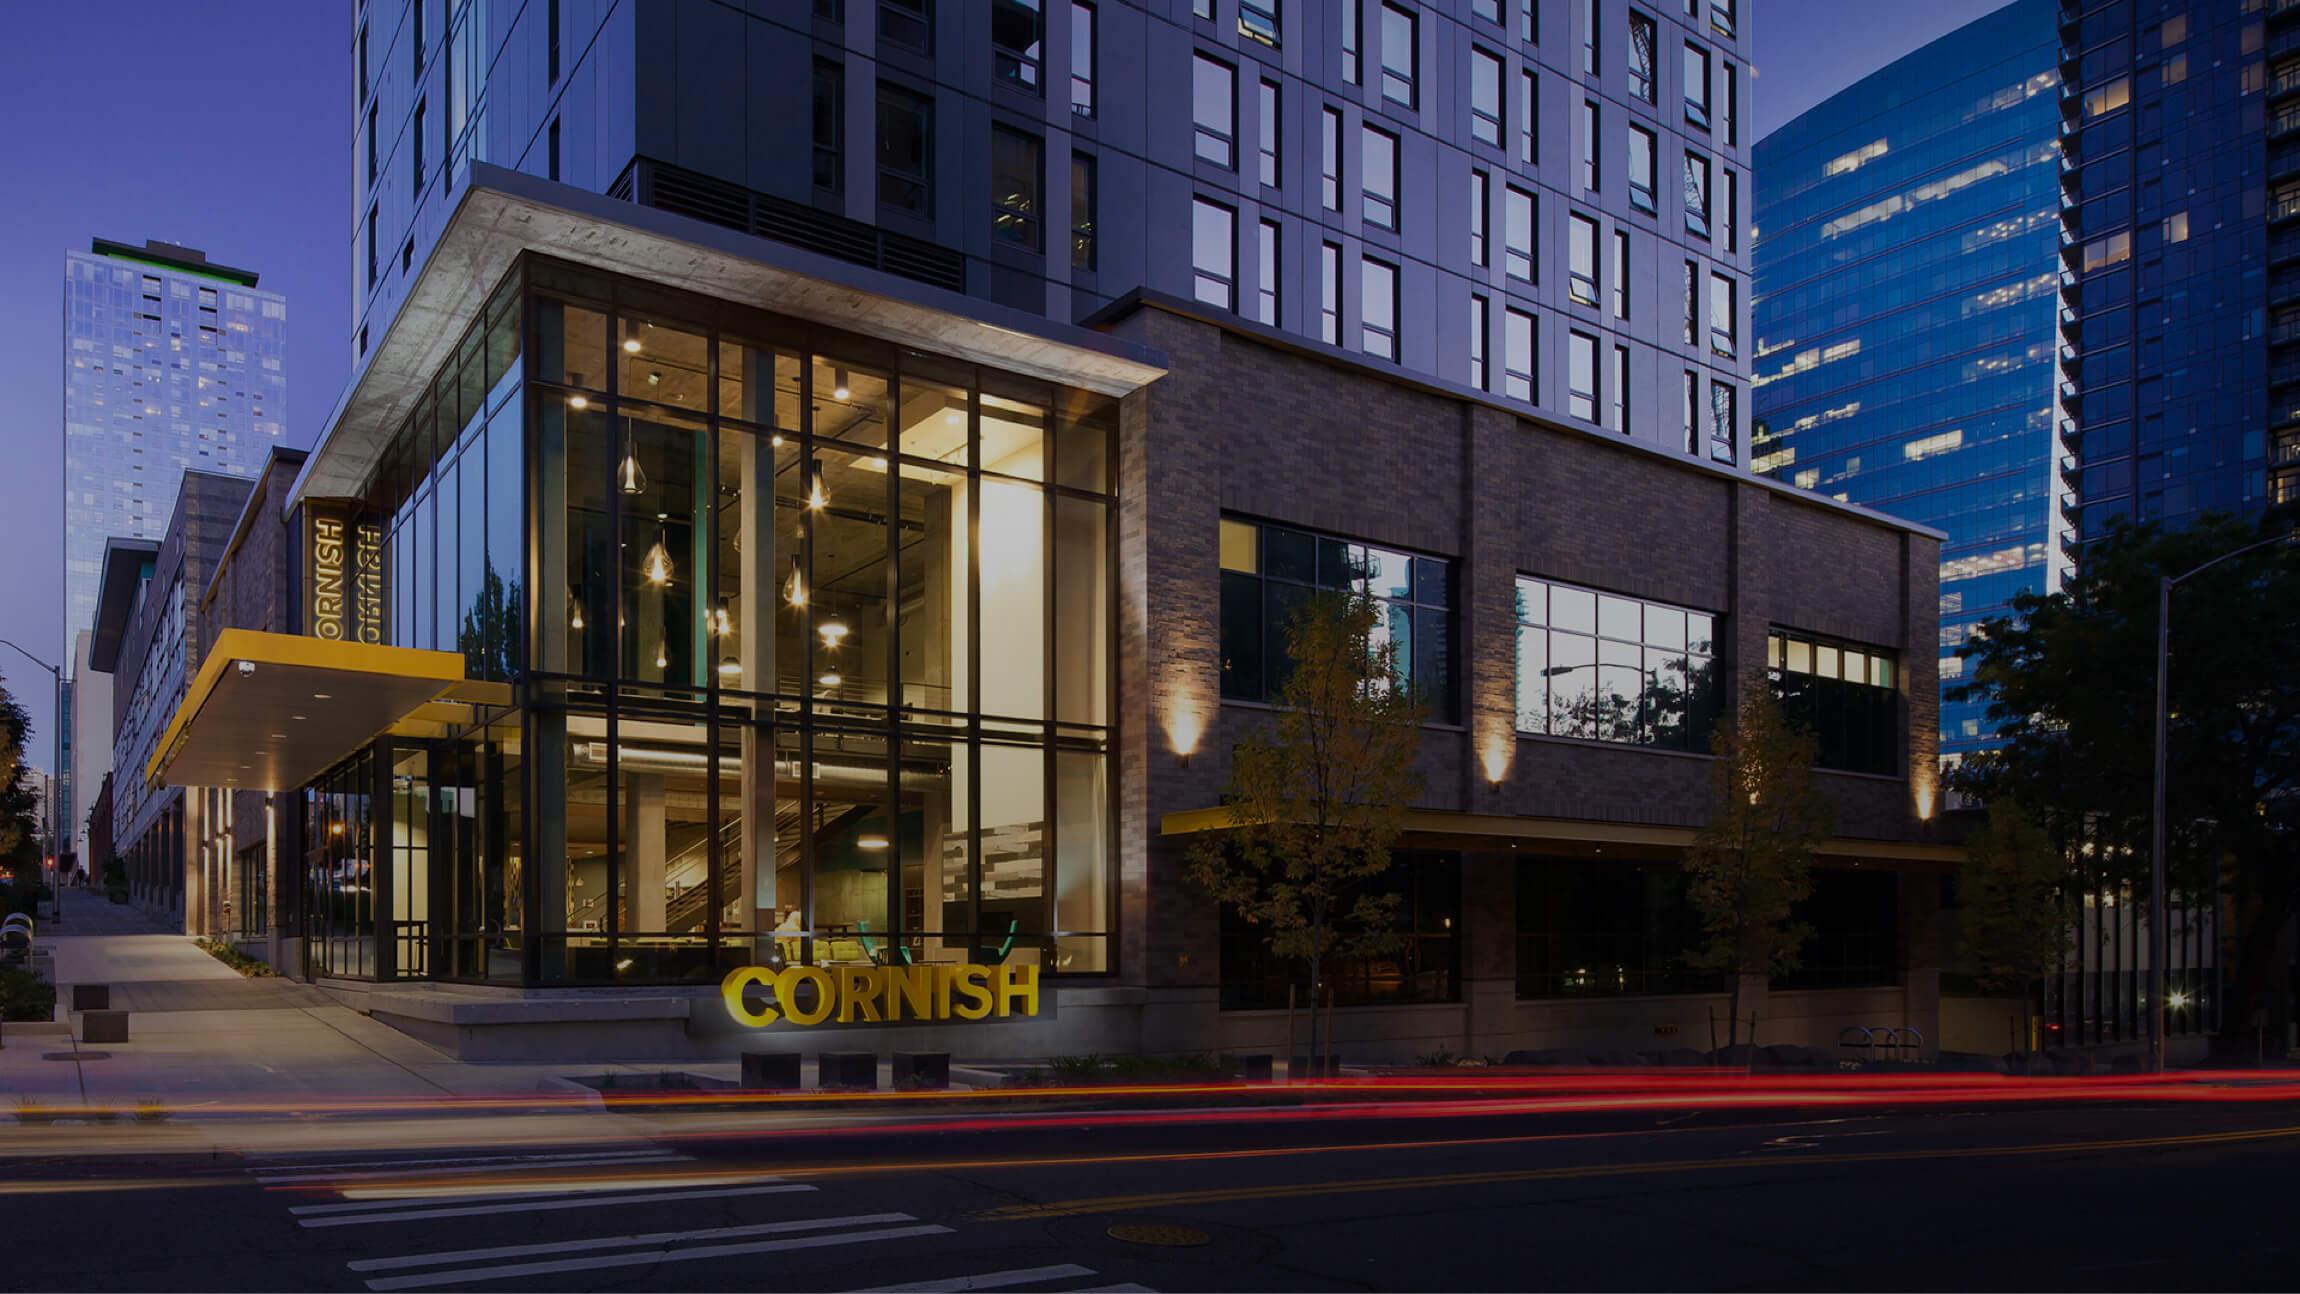 Cornish campus in downtown Seattle at night